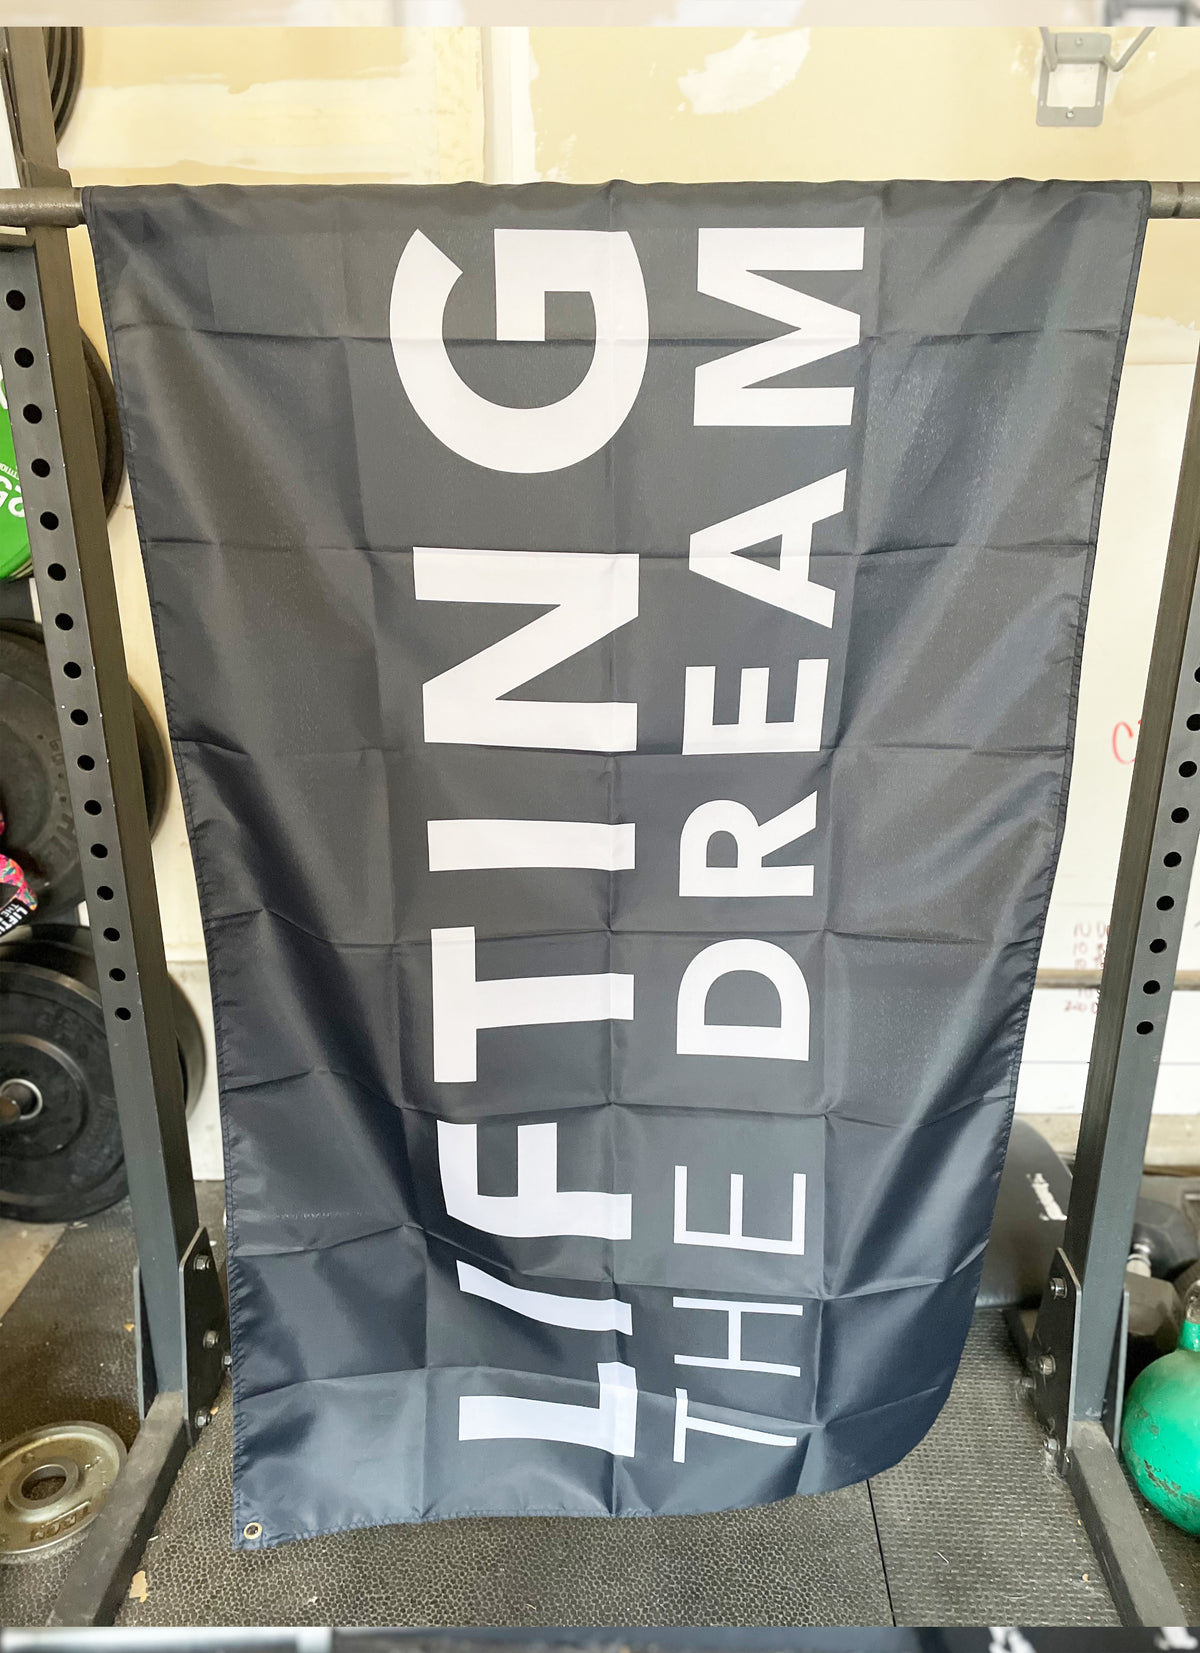 Lifting the Dream Gym Banner